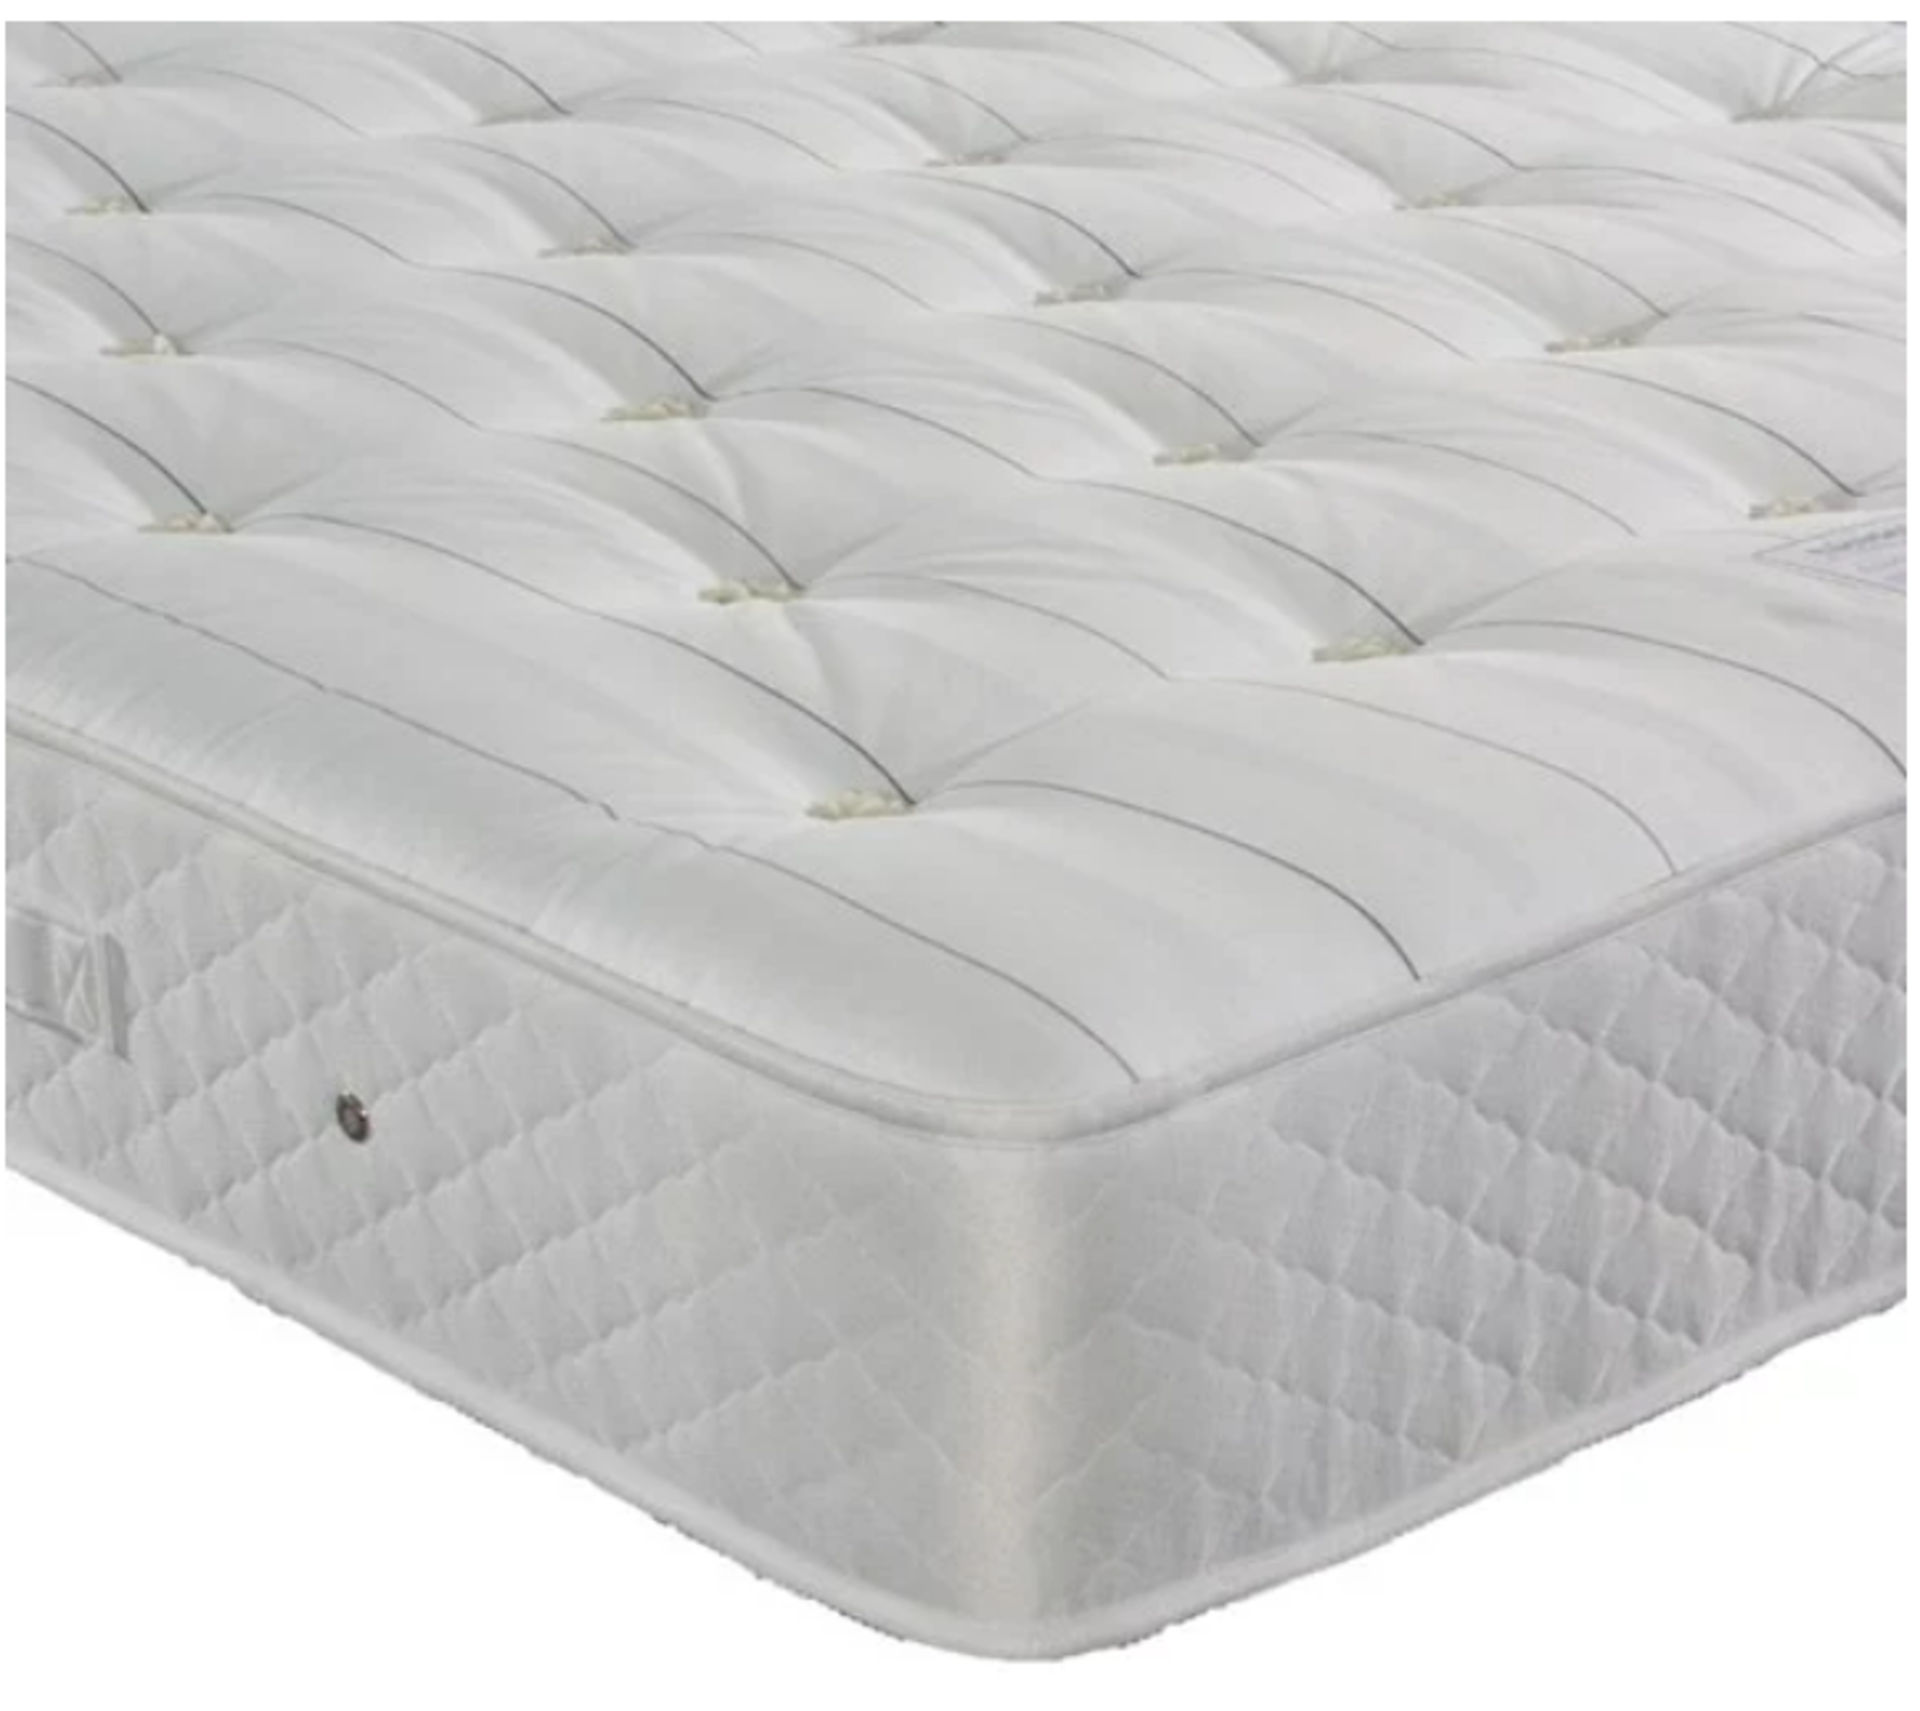 Carpetright NESTLEDOWN ETON Bed Mattress 6ft Super King RRP ¶œ1149.00 - This product has been graded